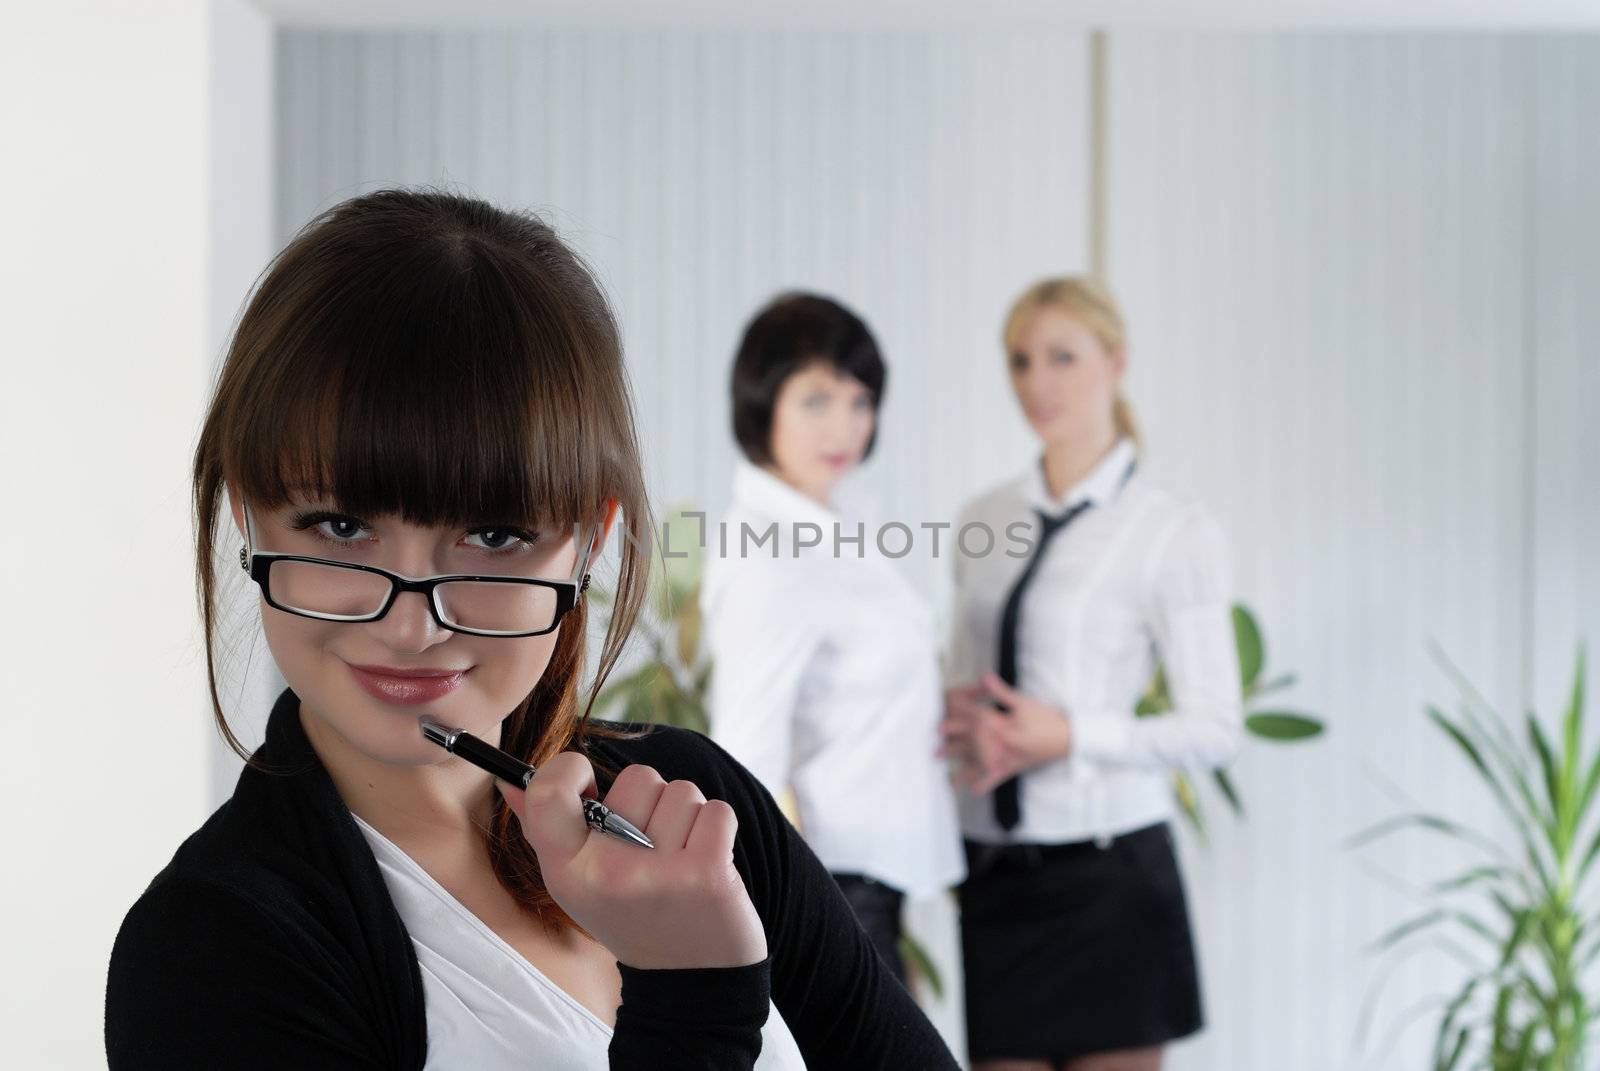  The young business woman at office with colleagues 

